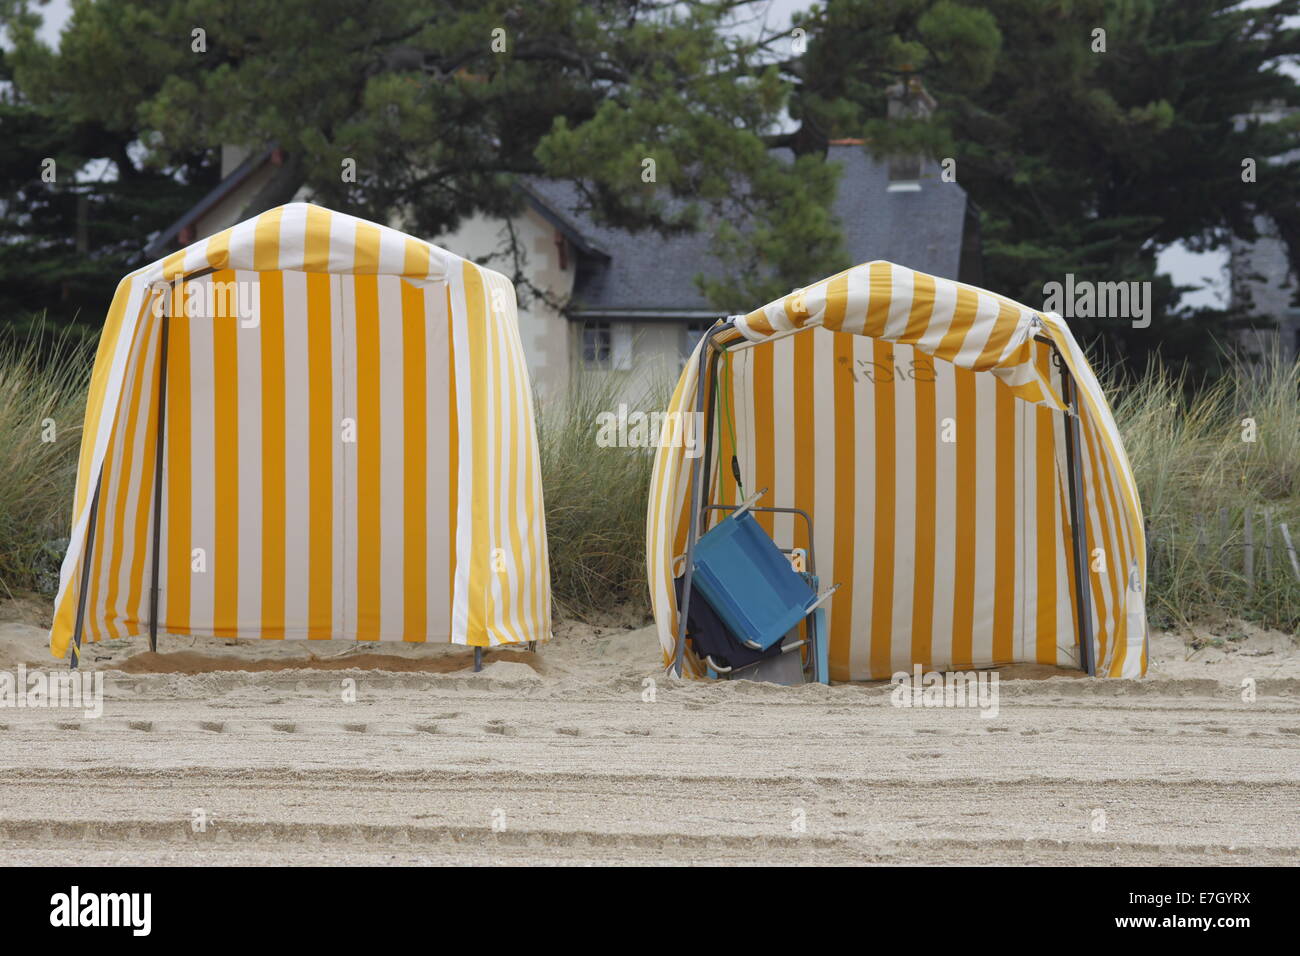 Beach huts at Carnac, Brittany/Bretagne, France. Yellow and white deckchair stripes. Tracks in sand. Stock Photo